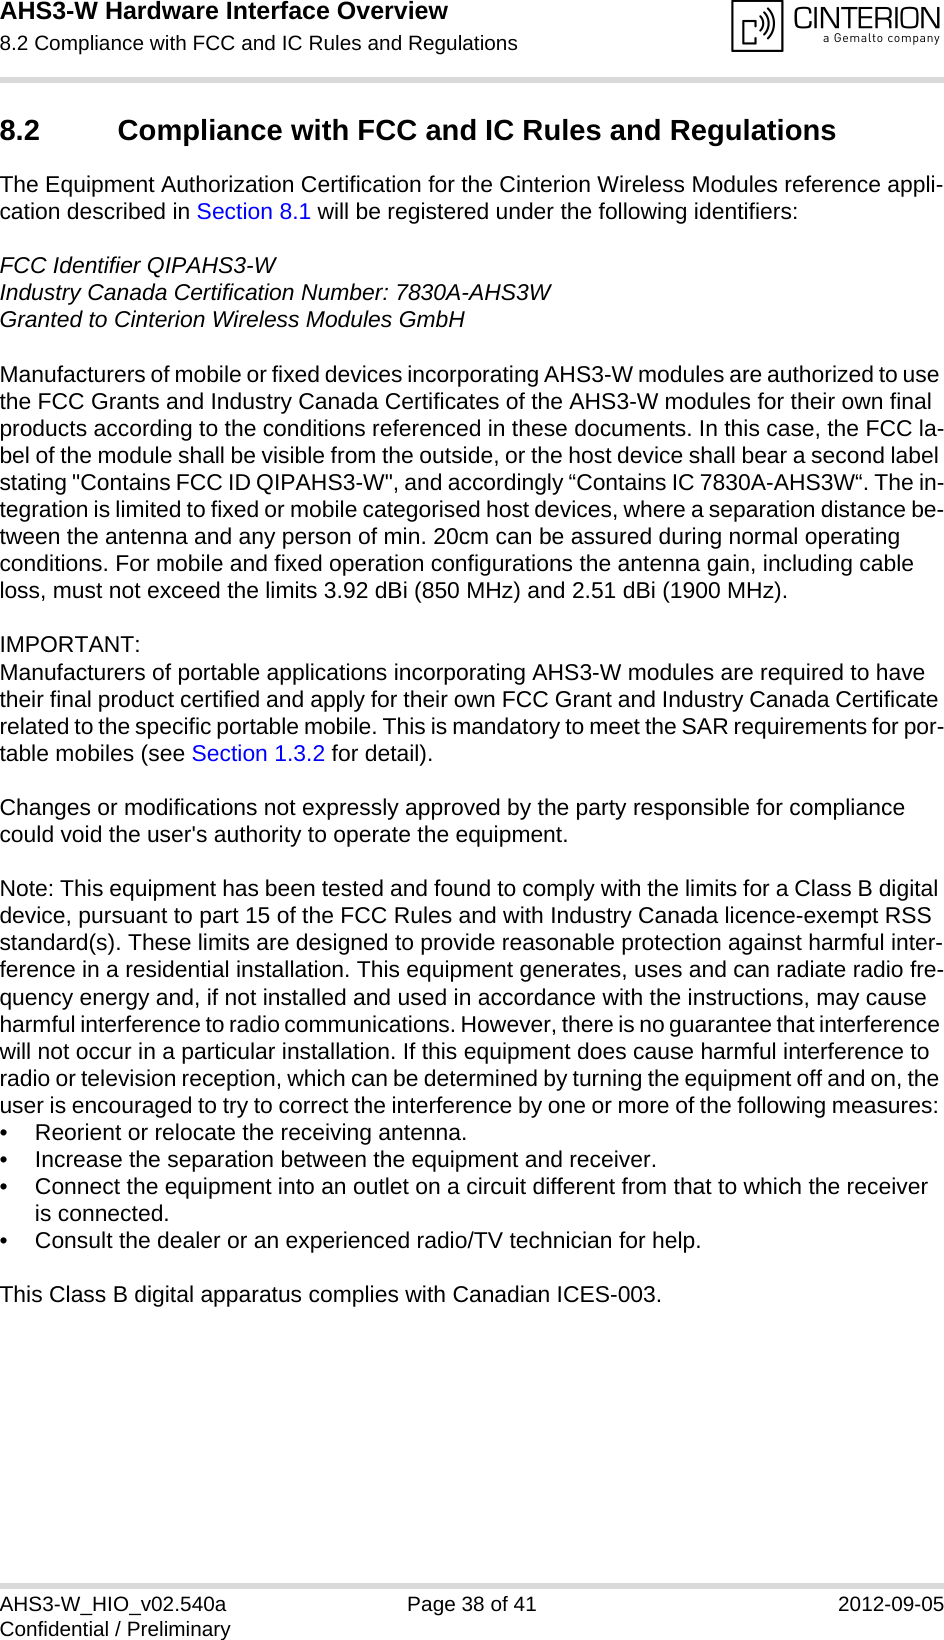 AHS3-W Hardware Interface Overview8.2 Compliance with FCC and IC Rules and Regulations38AHS3-W_HIO_v02.540a Page 38 of 41 2012-09-05Confidential / Preliminary8.2 Compliance with FCC and IC Rules and Regulations The Equipment Authorization Certification for the Cinterion Wireless Modules reference appli-cation described in Section 8.1 will be registered under the following identifiers:FCC Identifier QIPAHS3-WIndustry Canada Certification Number: 7830A-AHS3WGranted to Cinterion Wireless Modules GmbH Manufacturers of mobile or fixed devices incorporating AHS3-W modules are authorized to use the FCC Grants and Industry Canada Certificates of the AHS3-W modules for their own final products according to the conditions referenced in these documents. In this case, the FCC la-bel of the module shall be visible from the outside, or the host device shall bear a second label stating &quot;Contains FCC ID QIPAHS3-W&quot;, and accordingly “Contains IC 7830A-AHS3W“. The in-tegration is limited to fixed or mobile categorised host devices, where a separation distance be-tween the antenna and any person of min. 20cm can be assured during normal operating conditions. For mobile and fixed operation configurations the antenna gain, including cable loss, must not exceed the limits 3.92 dBi (850 MHz) and 2.51 dBi (1900 MHz).IMPORTANT:Manufacturers of portable applications incorporating AHS3-W modules are required to have their final product certified and apply for their own FCC Grant and Industry Canada Certificate related to the specific portable mobile. This is mandatory to meet the SAR requirements for por-table mobiles (see Section 1.3.2 for detail).Changes or modifications not expressly approved by the party responsible for compliance could void the user&apos;s authority to operate the equipment.Note: This equipment has been tested and found to comply with the limits for a Class B digital device, pursuant to part 15 of the FCC Rules and with Industry Canada licence-exempt RSS standard(s). These limits are designed to provide reasonable protection against harmful inter-ference in a residential installation. This equipment generates, uses and can radiate radio fre-quency energy and, if not installed and used in accordance with the instructions, may cause harmful interference to radio communications. However, there is no guarantee that interference will not occur in a particular installation. If this equipment does cause harmful interference to radio or television reception, which can be determined by turning the equipment off and on, the user is encouraged to try to correct the interference by one or more of the following measures: • Reorient or relocate the receiving antenna. • Increase the separation between the equipment and receiver. • Connect the equipment into an outlet on a circuit different from that to which the receiver is connected. • Consult the dealer or an experienced radio/TV technician for help.This Class B digital apparatus complies with Canadian ICES-003.